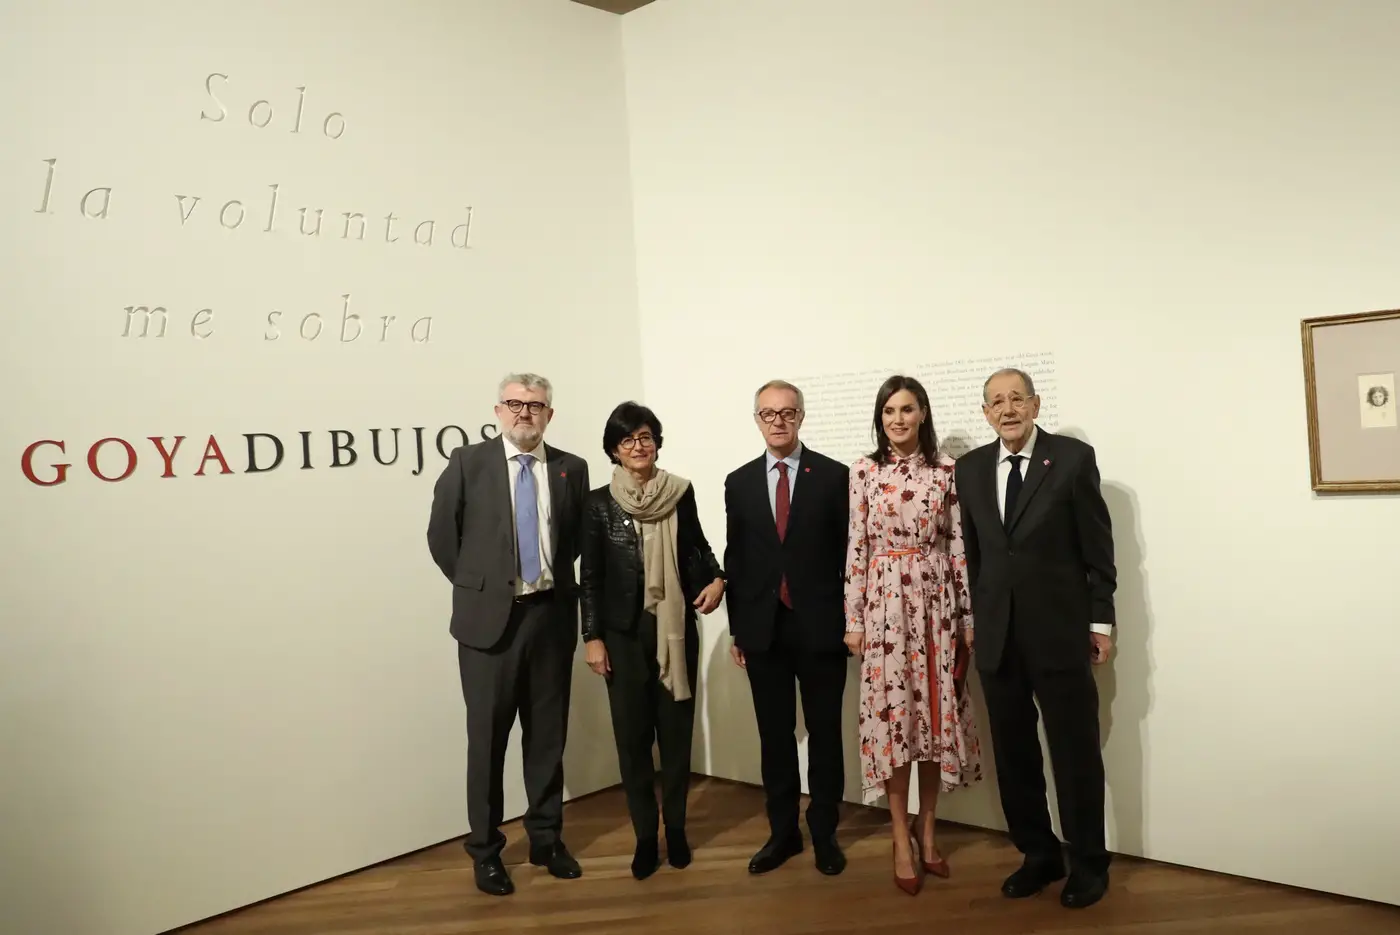 Queen-Letizia-attended-the-opening-of-the-goya-exhibition